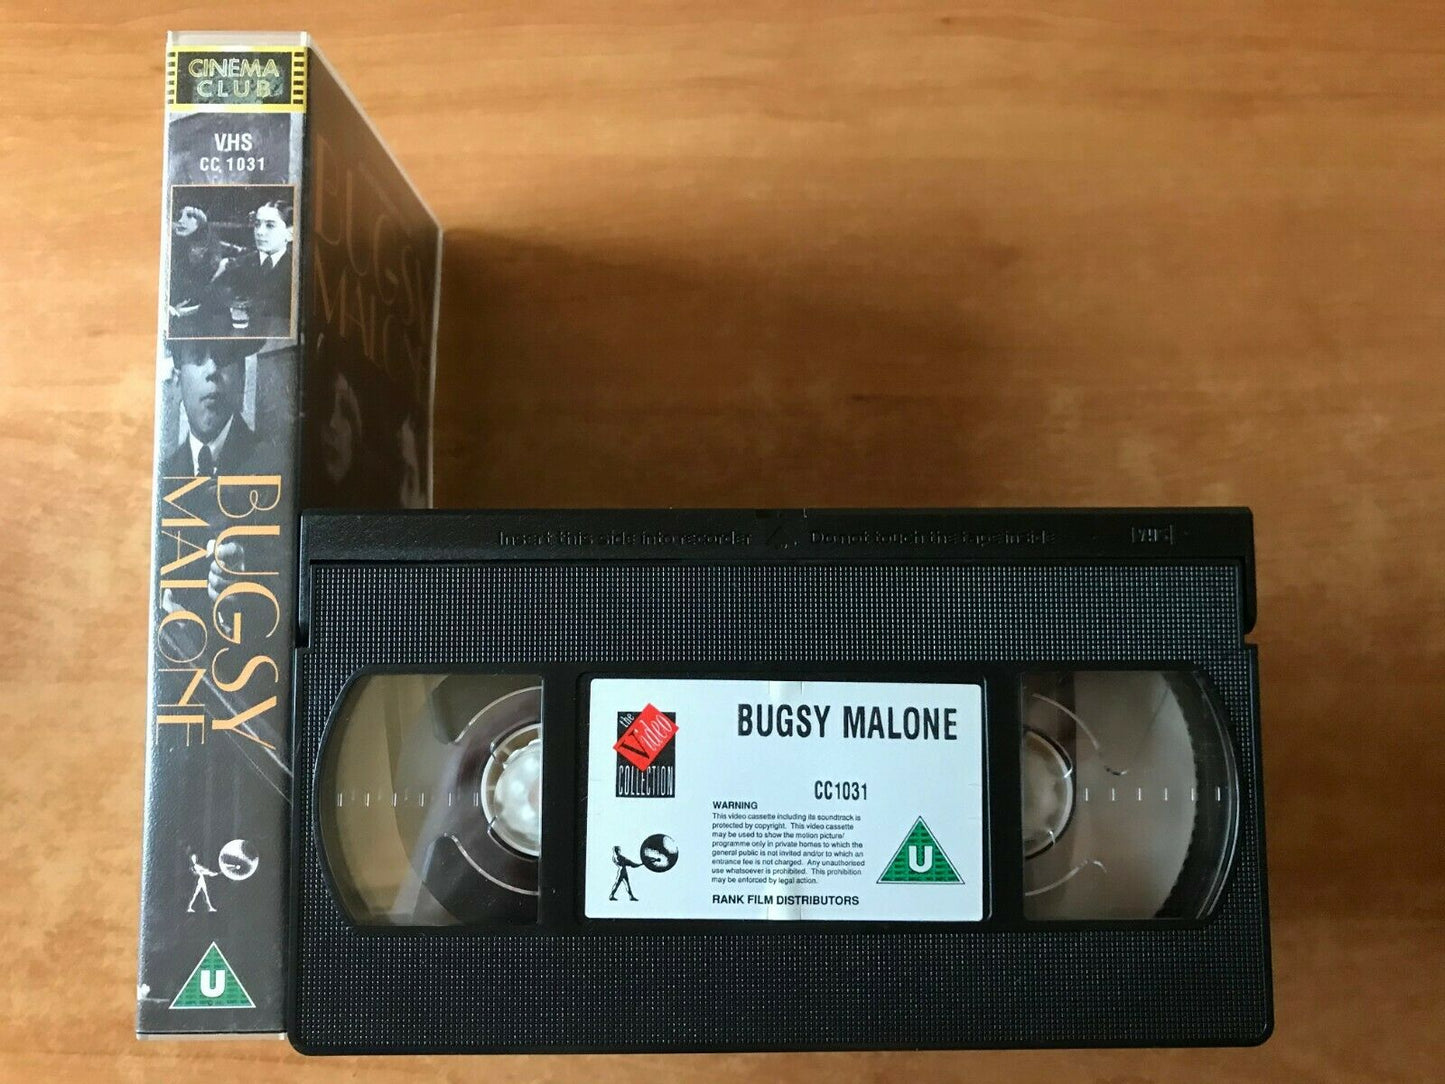 Bugsy Malone (1976); [Alan Parker] Gangster Musical Spoof - Jodie Foster - VHS-